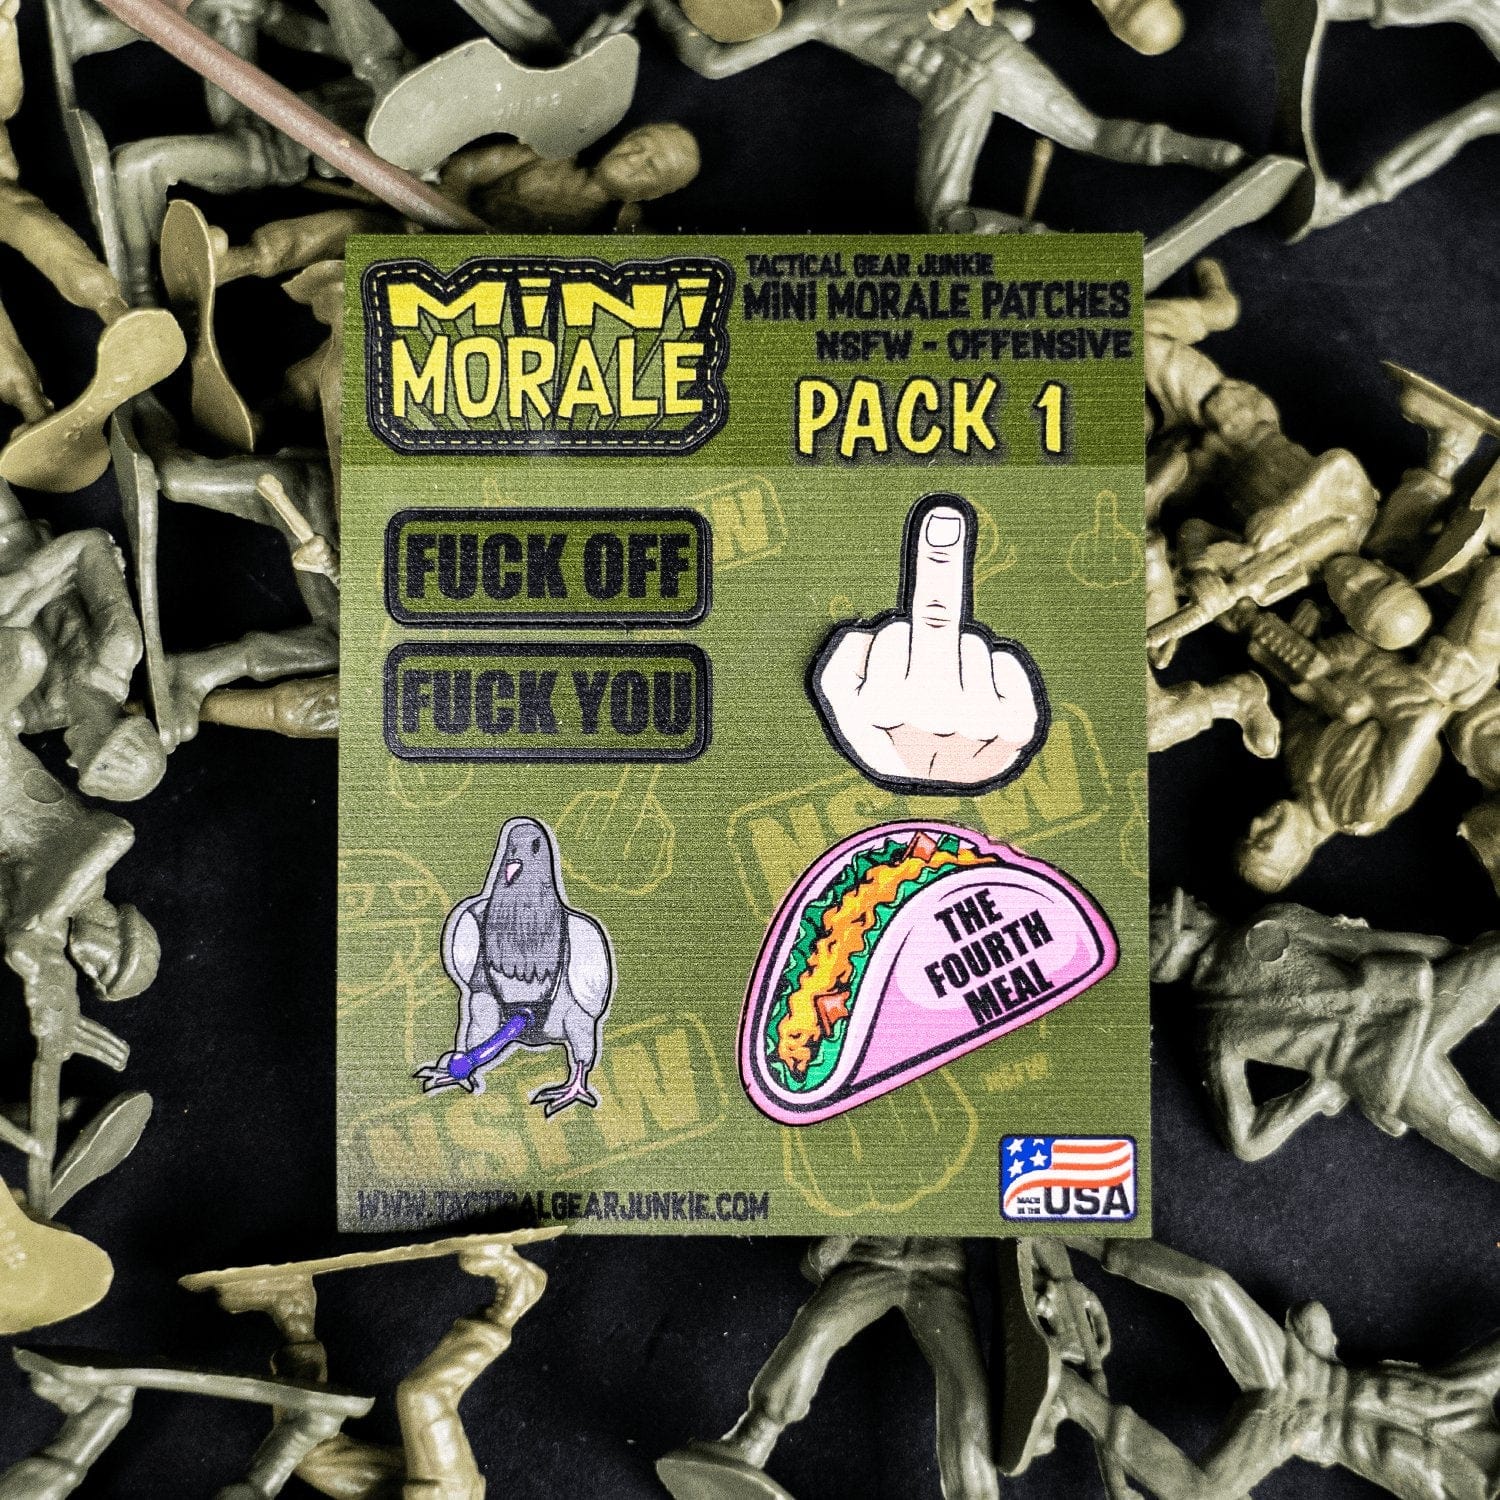 Tactical Gear Junkie Patches Mini Morale - NSFW Offensive Patch Pack 1